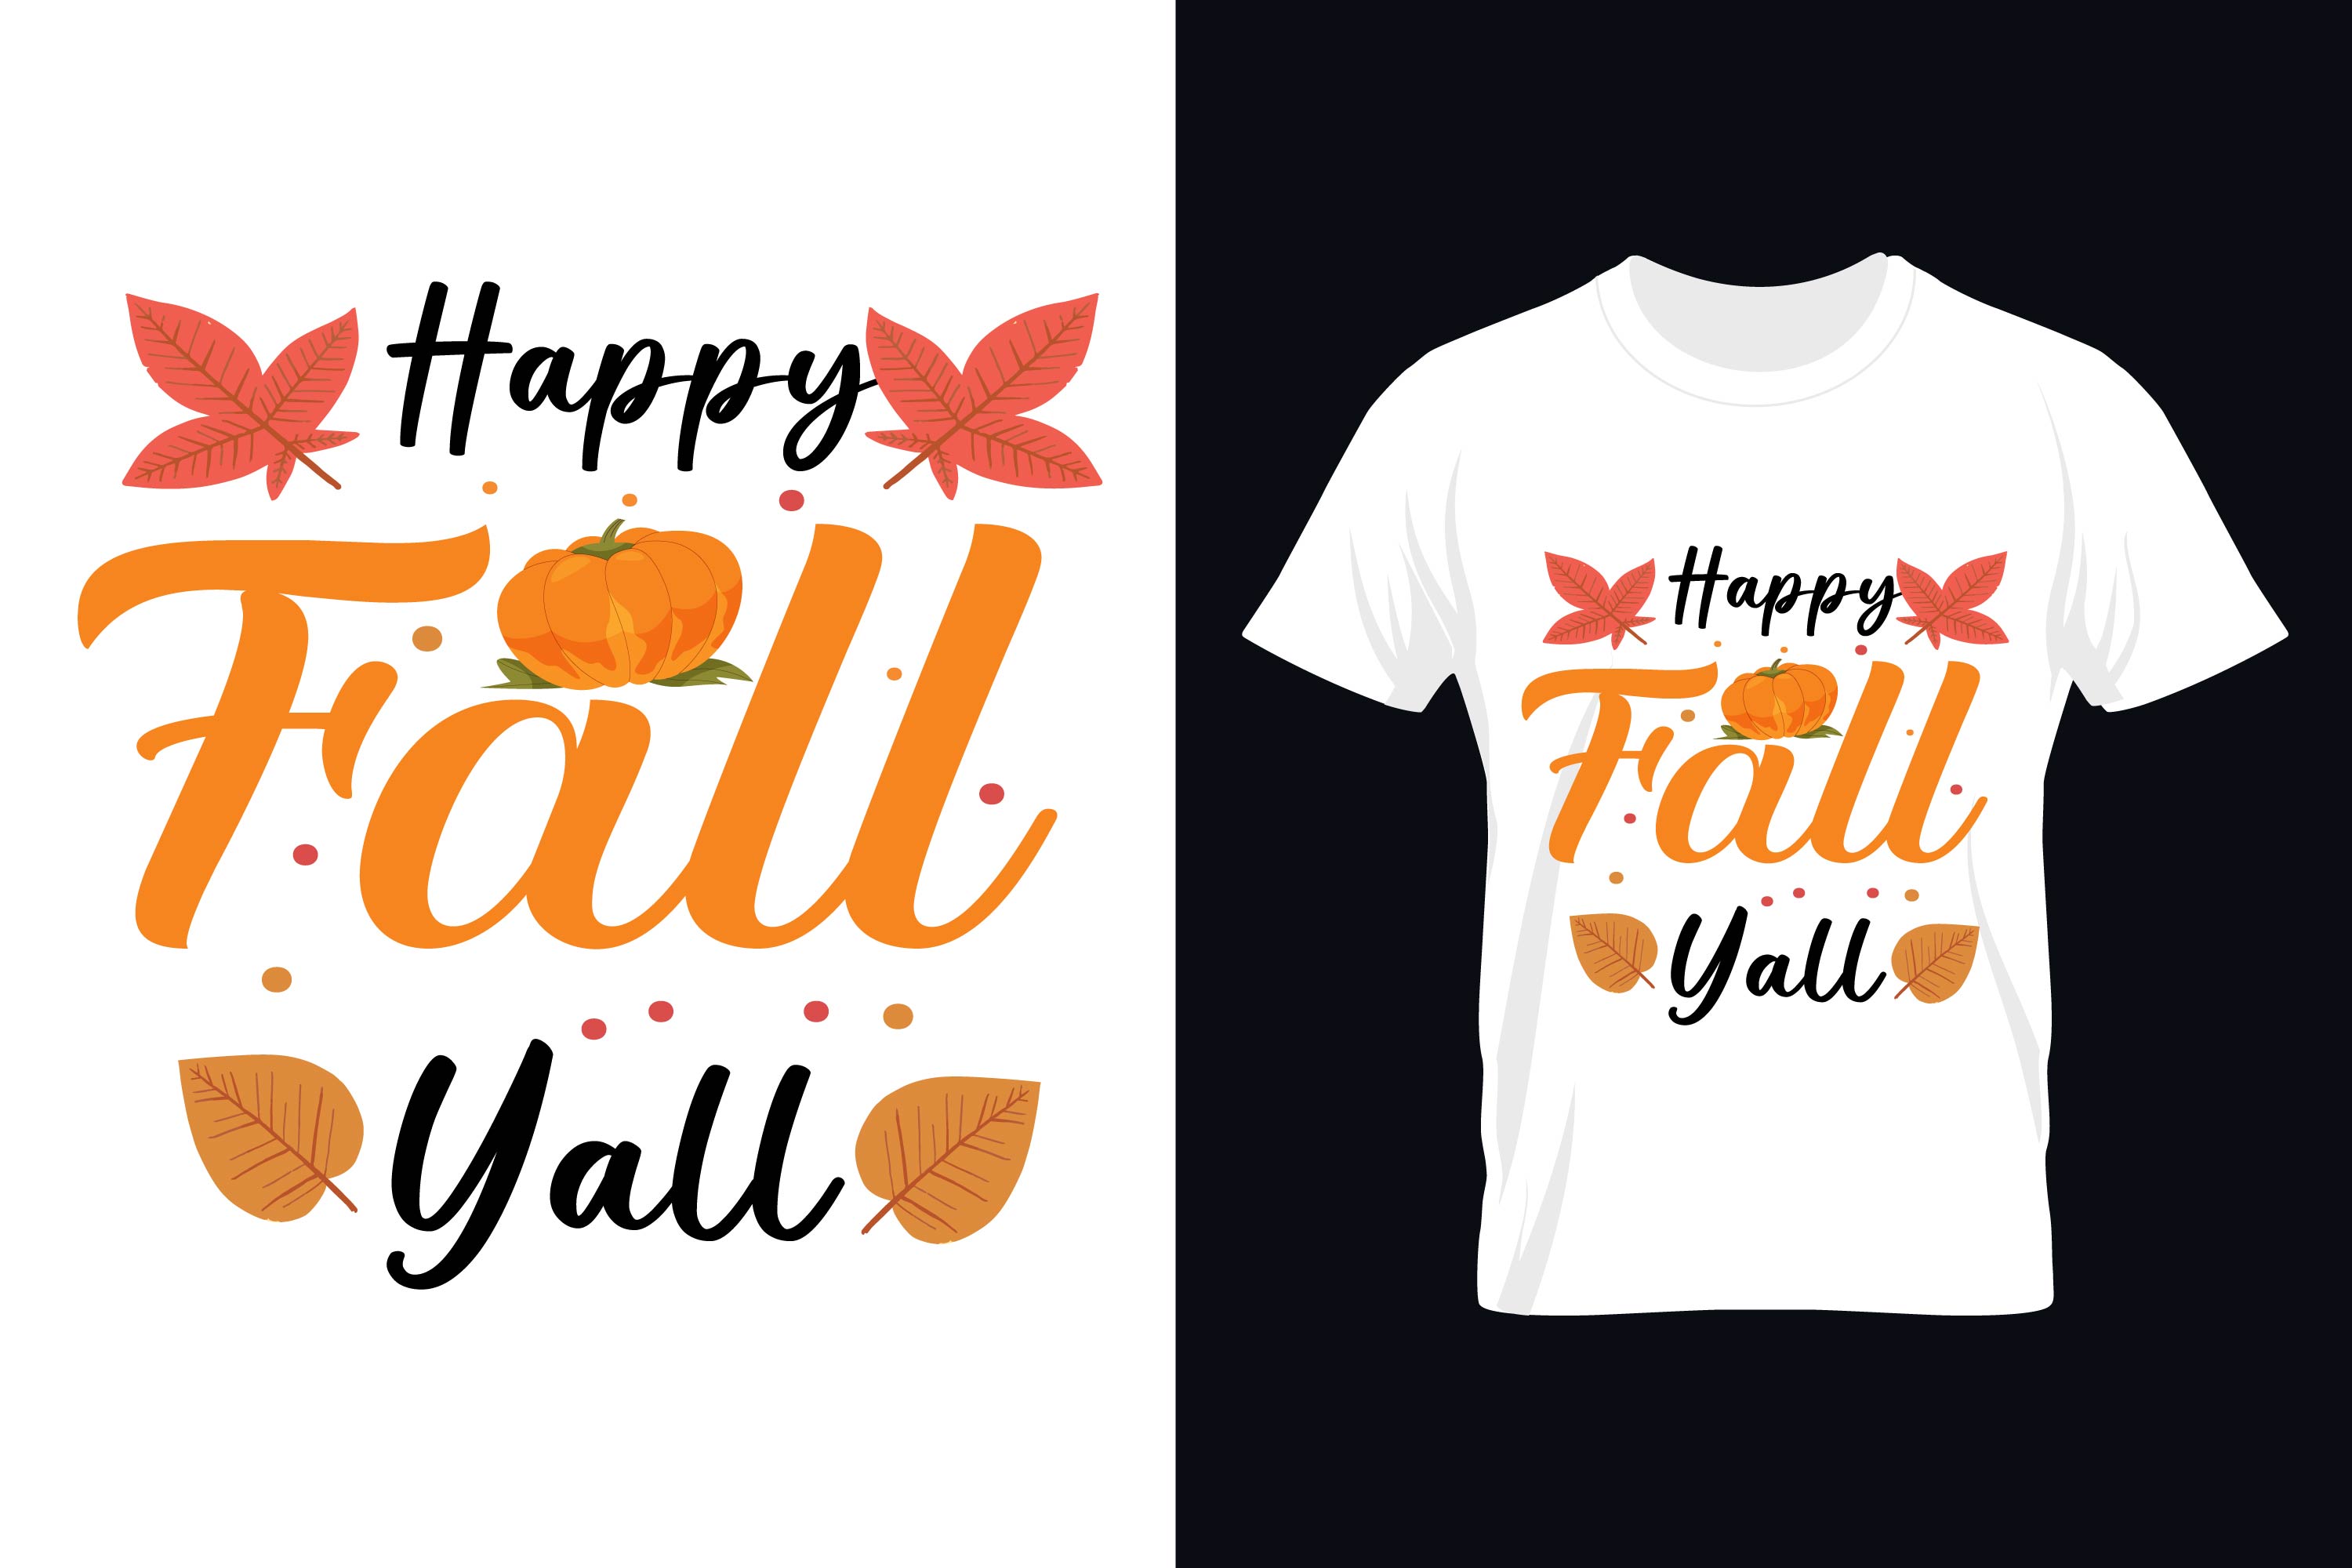 Image of a white t-shirt with an amazing inscription on the theme of autumn.